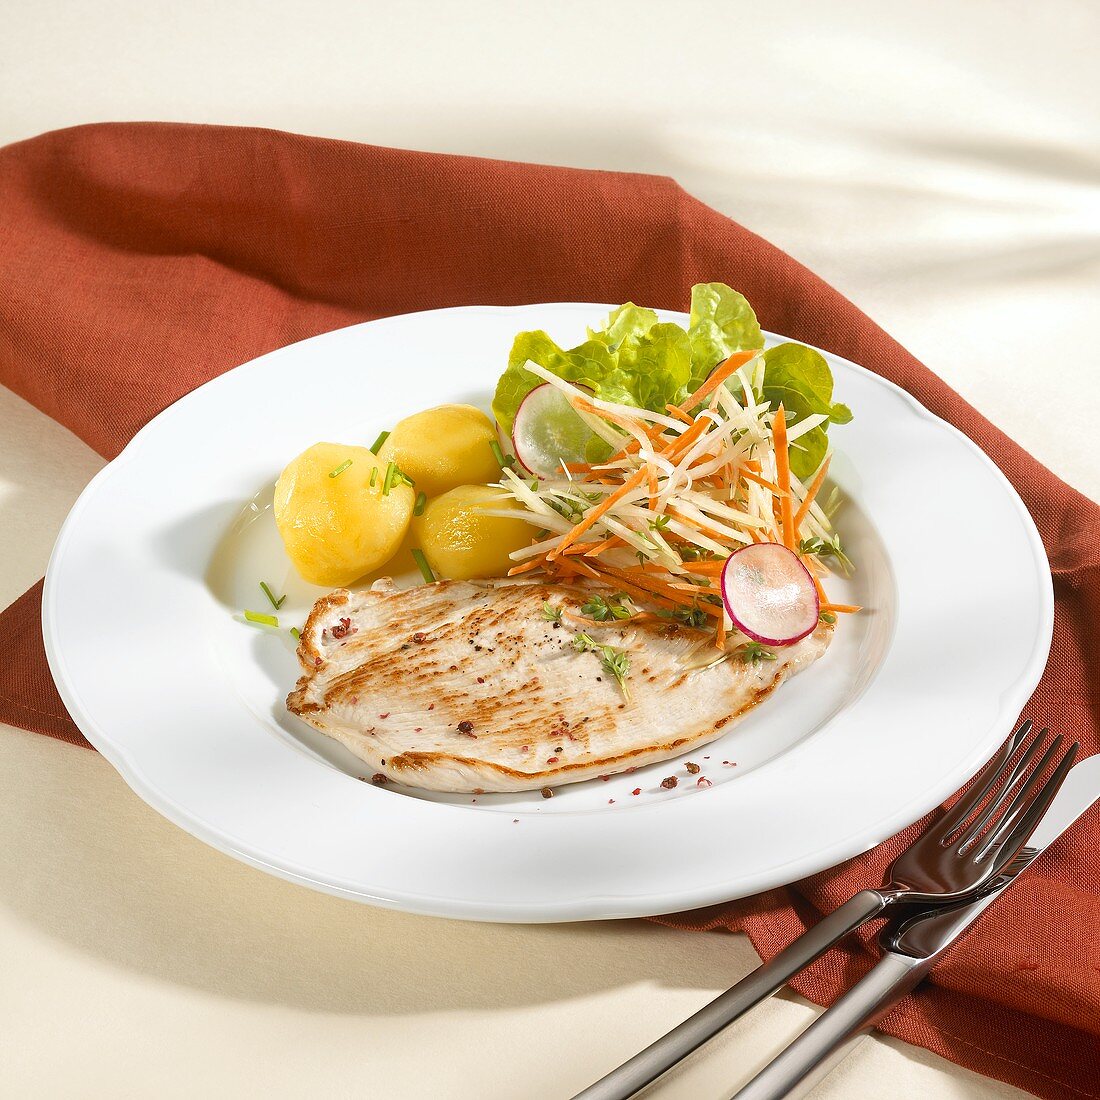 Turkey escalopes with boiled potatoes and salad